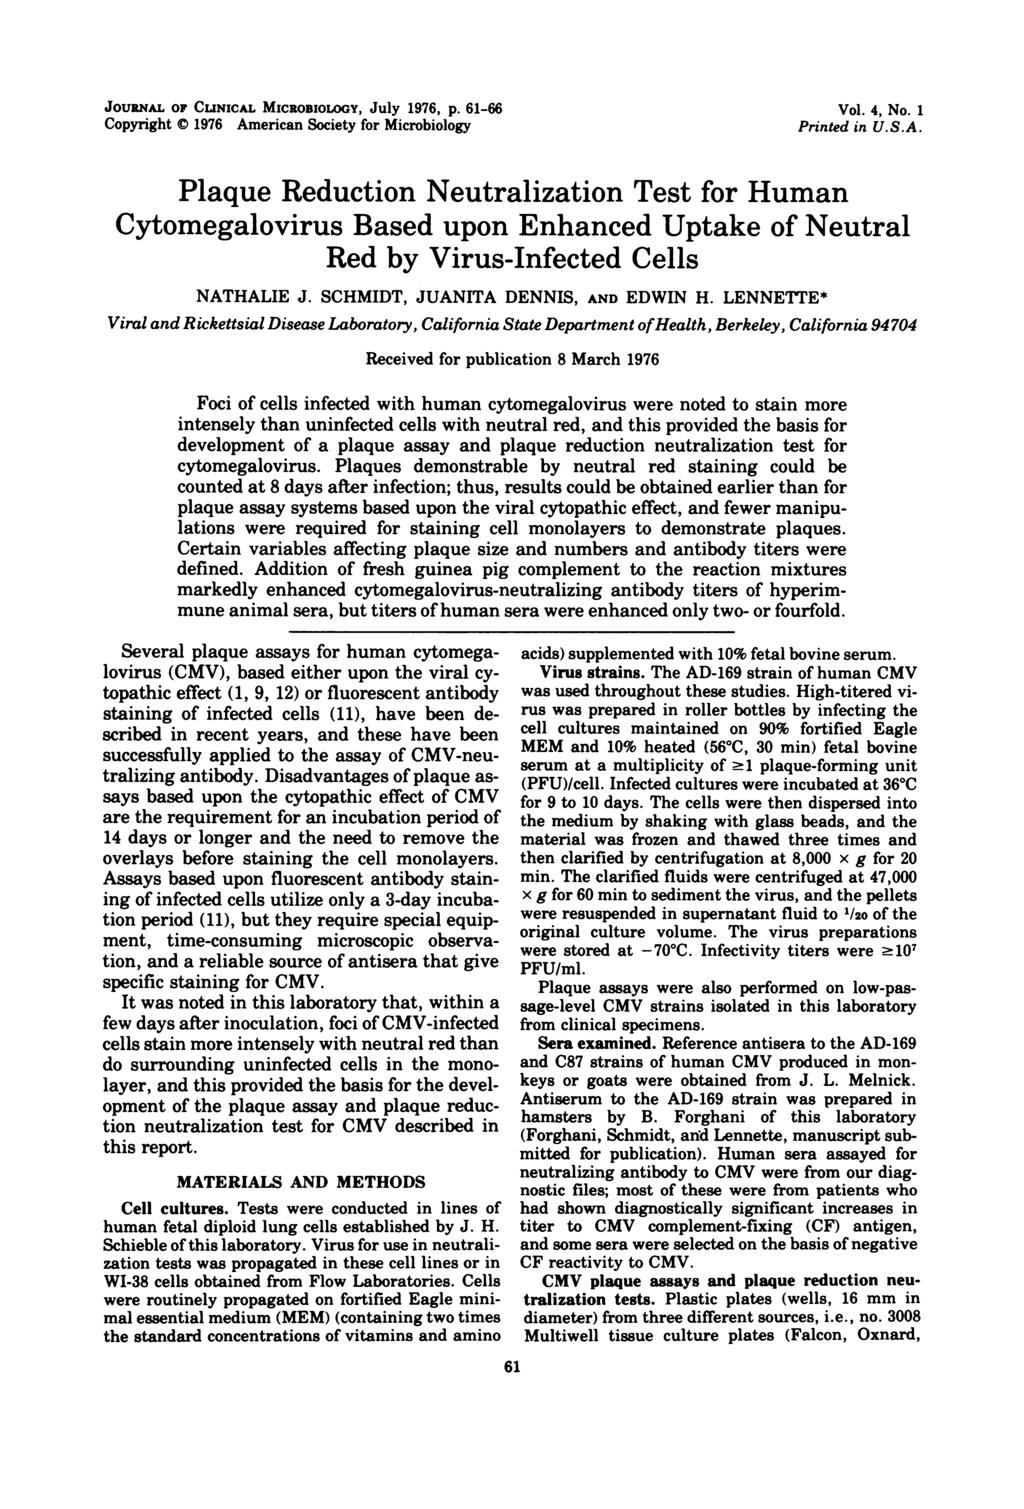 JOURNAL OF CUNICAL MICROBIOLOGY, JUlY 1976, p. 61-66 Copyright 1976 American Society for Microbiology Vol. 4, No. 1 Printed in U.S.A. Plaque Reduction Neutralization Test for Human Cytomegalovirus Based upon Enhanced Uptake of Neutral Red by Virus-Infected Cells NATHALIE J.